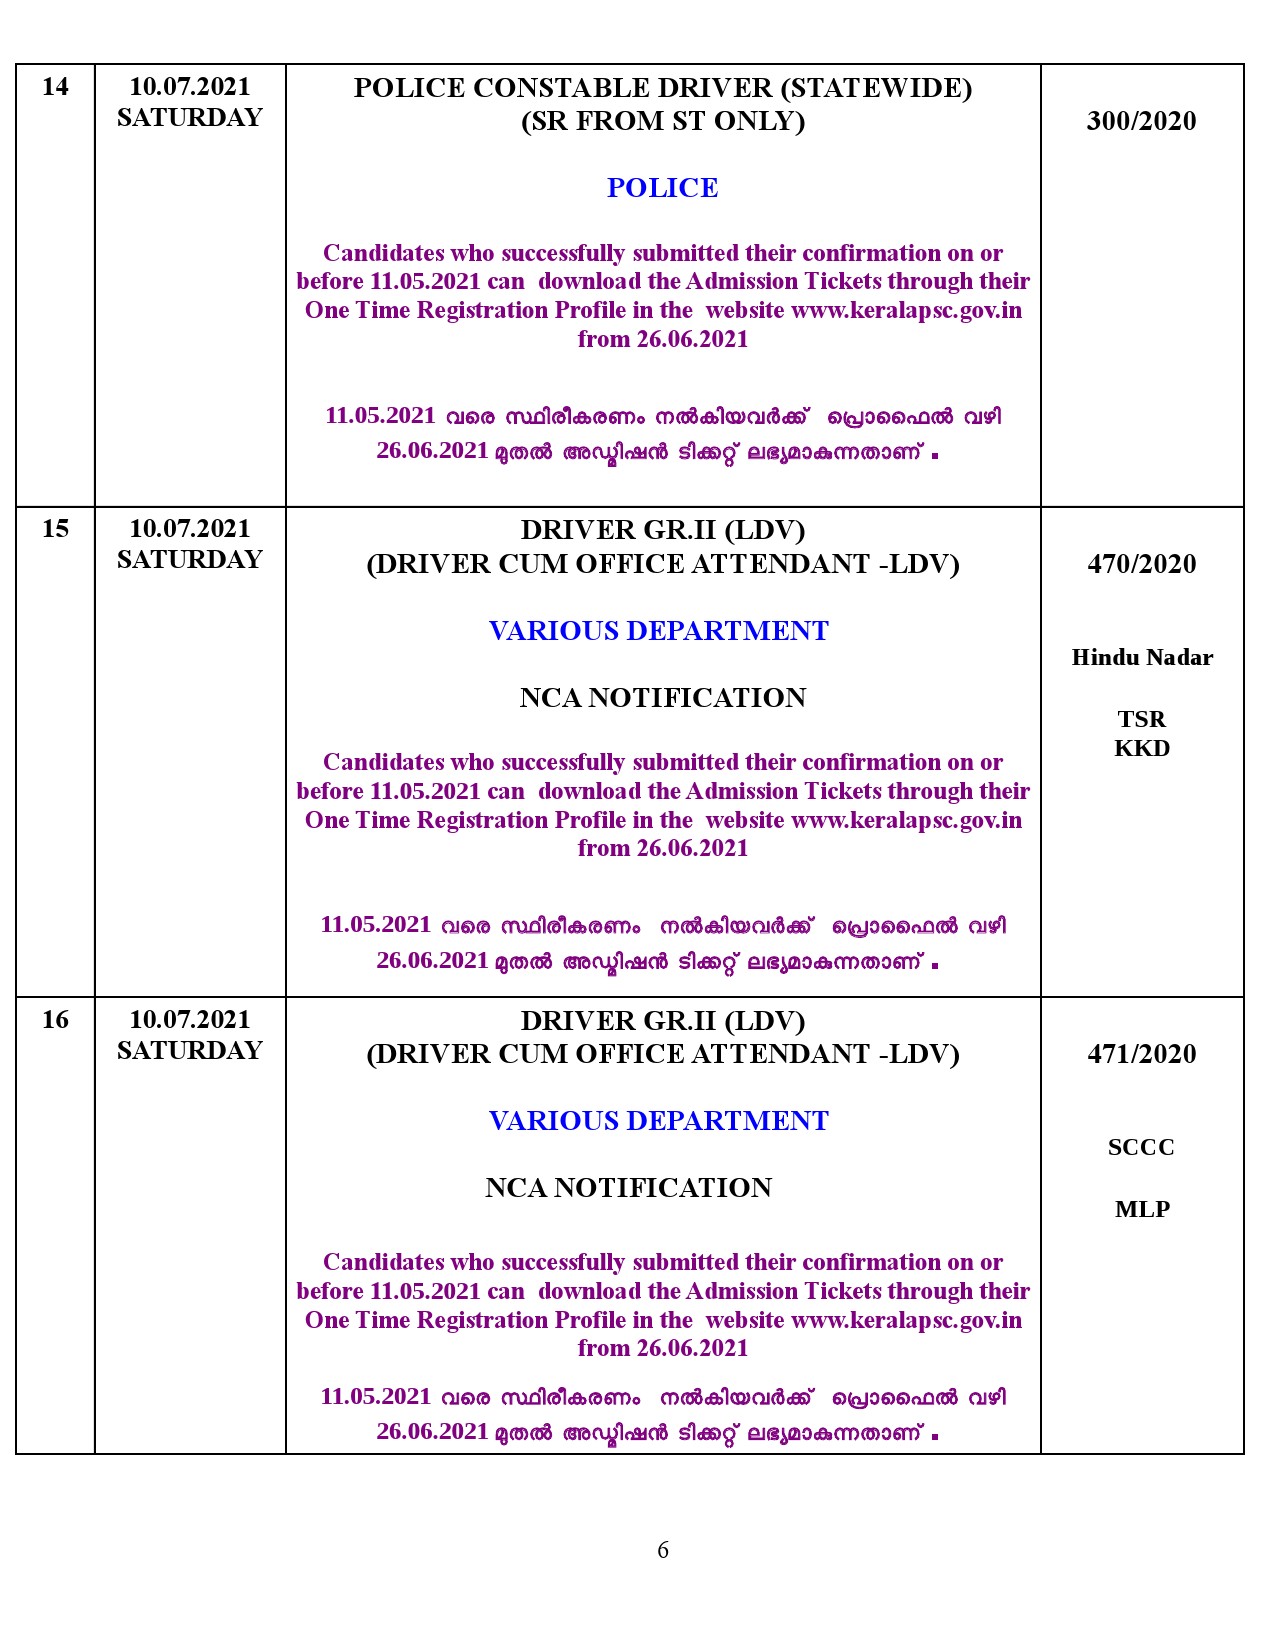 Examination Programme For The Month Of July 2021 - Notification Image 6